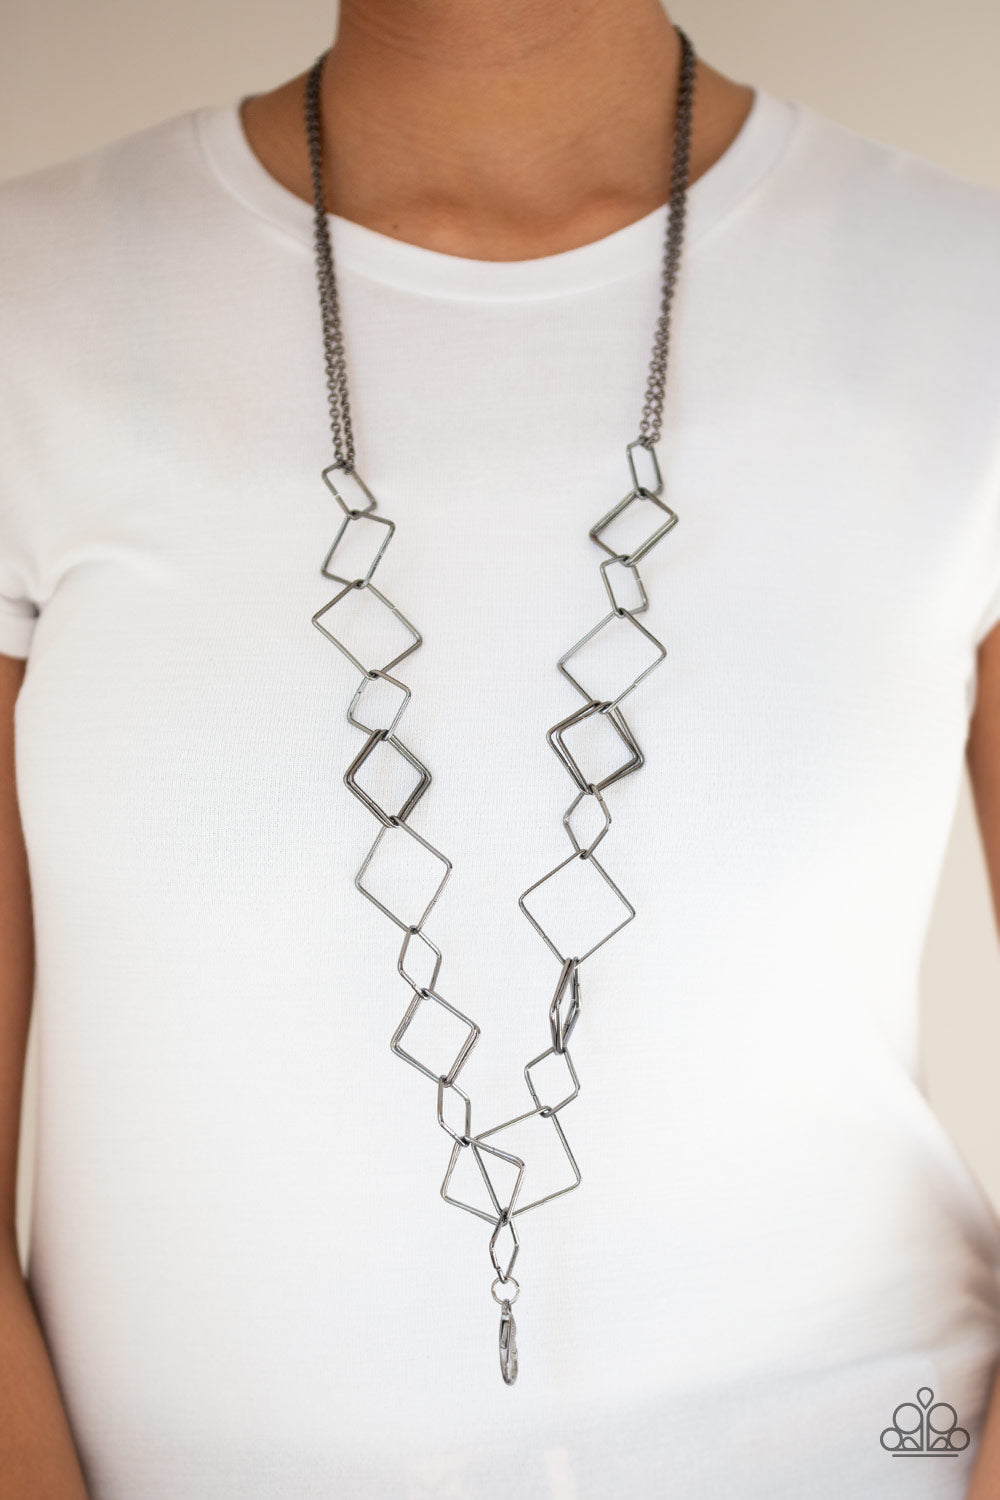 BACKED INTO A CORNER - BLACK GEOMETRIC SQUARES LANYARD NECKLACE